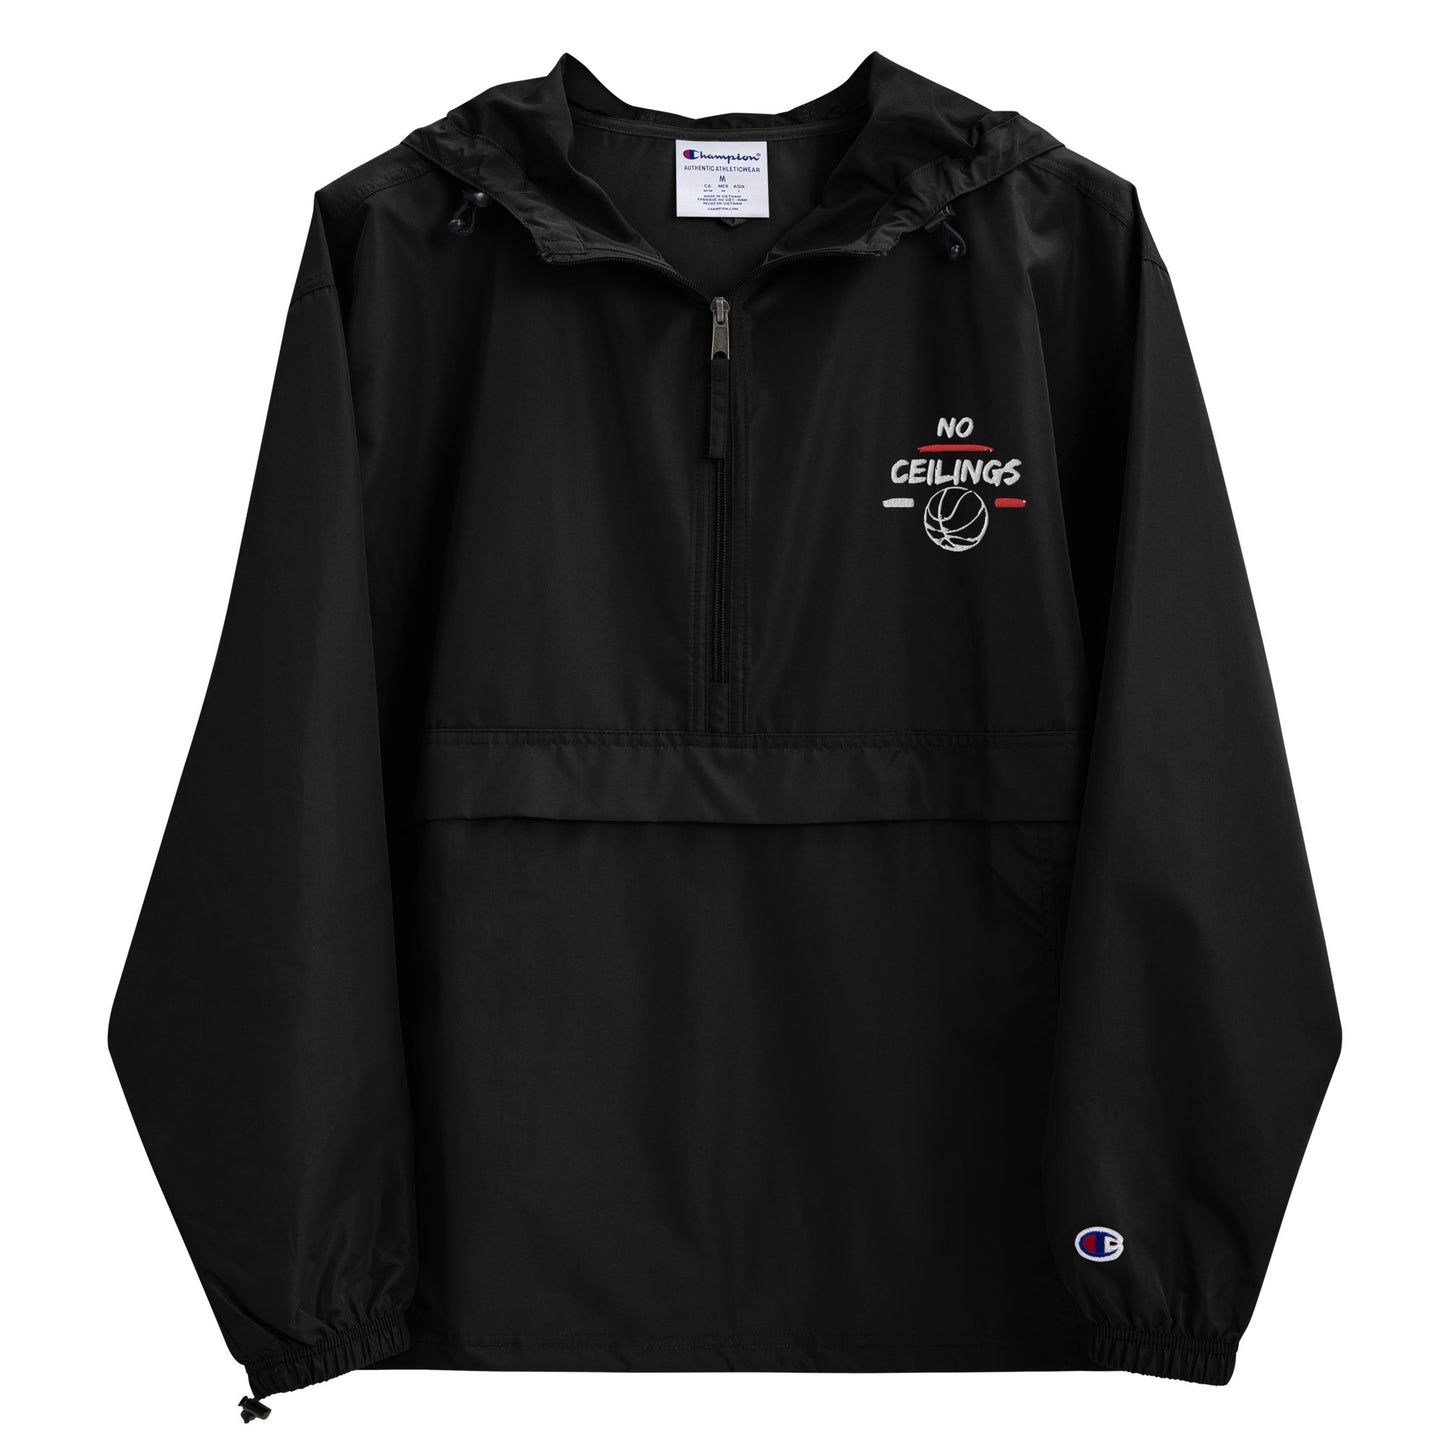 No Ceilings Champion Jacket